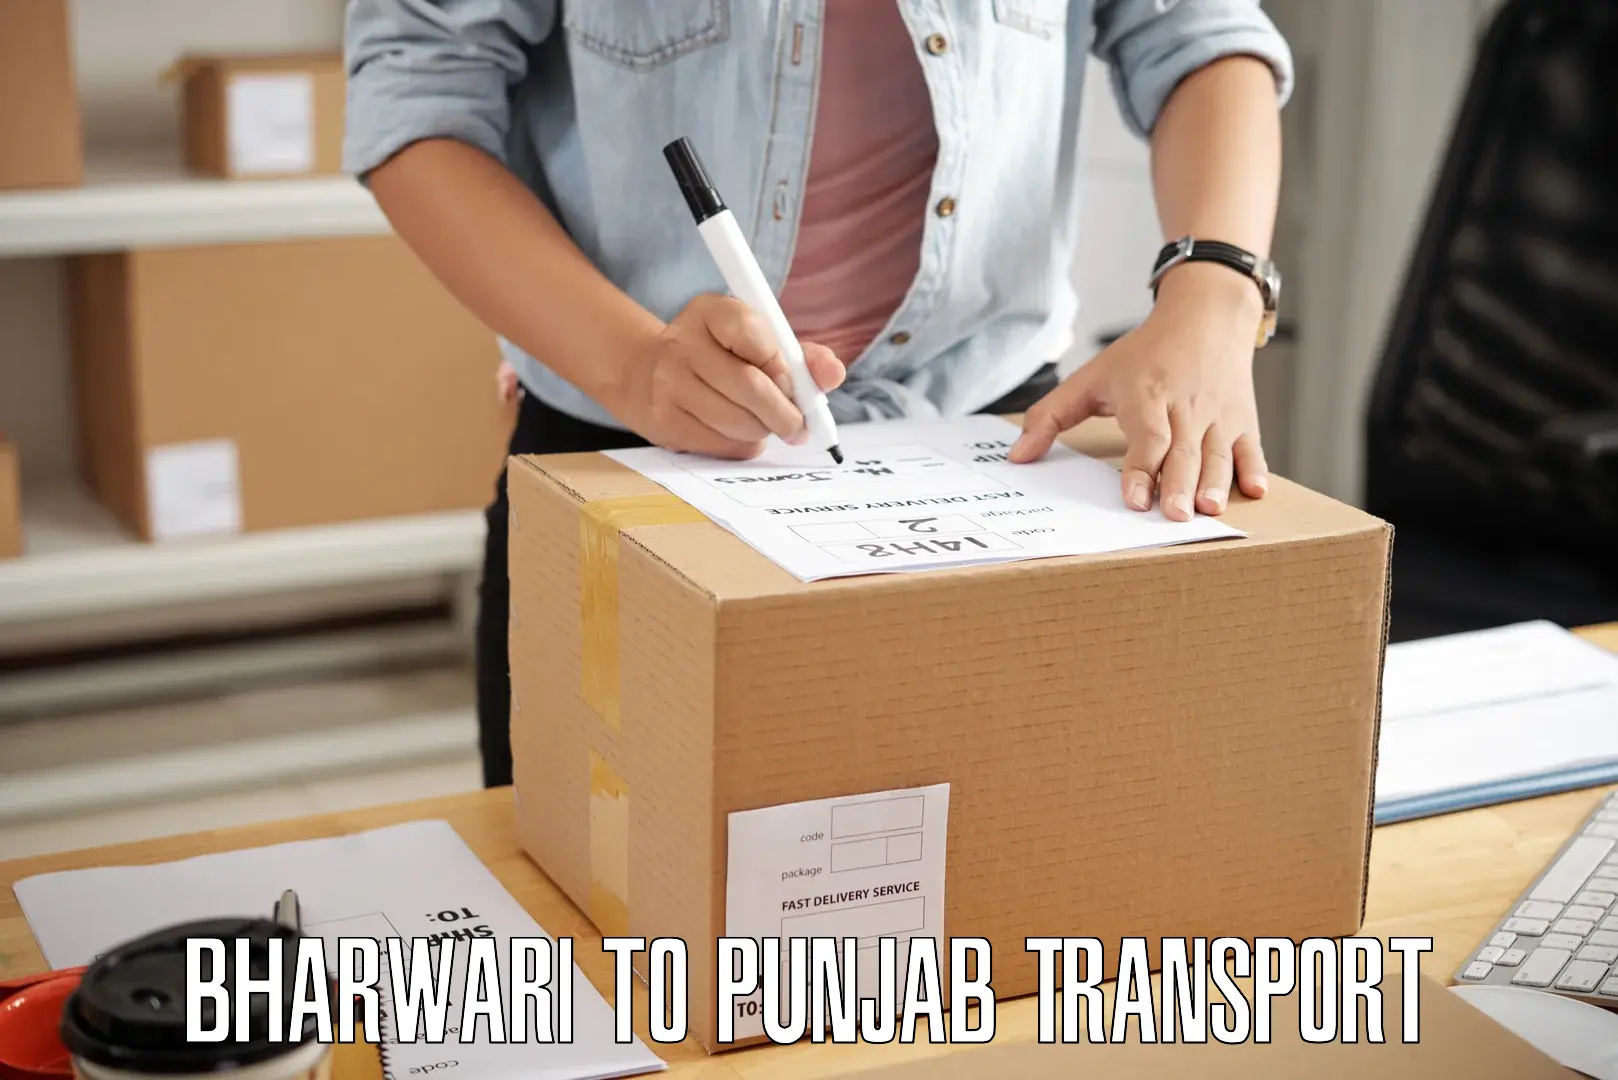 Transport bike from one state to another Bharwari to Punjab